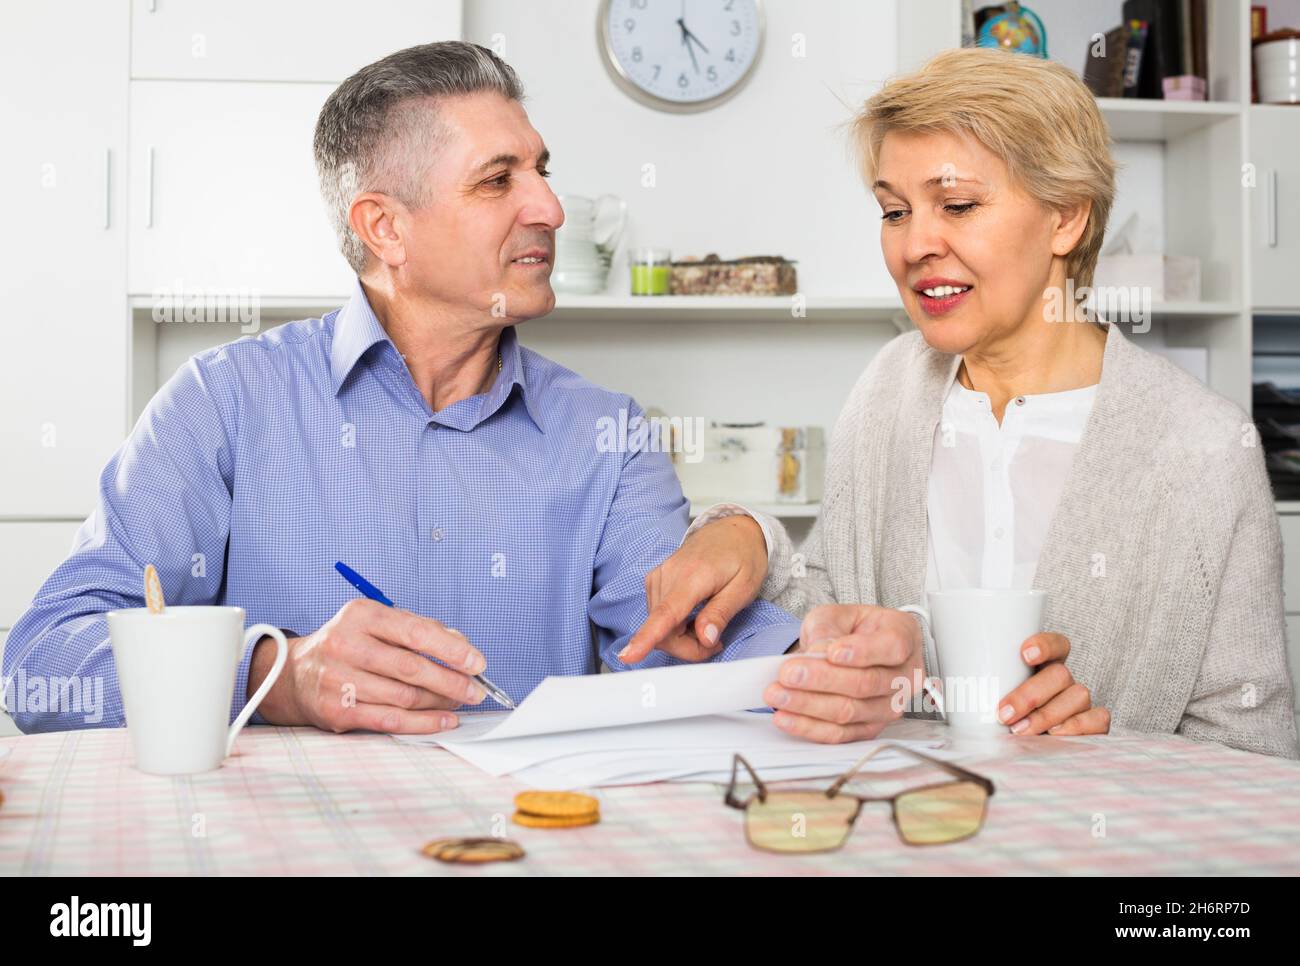 Husband and wife are lead discussion Stock Photo